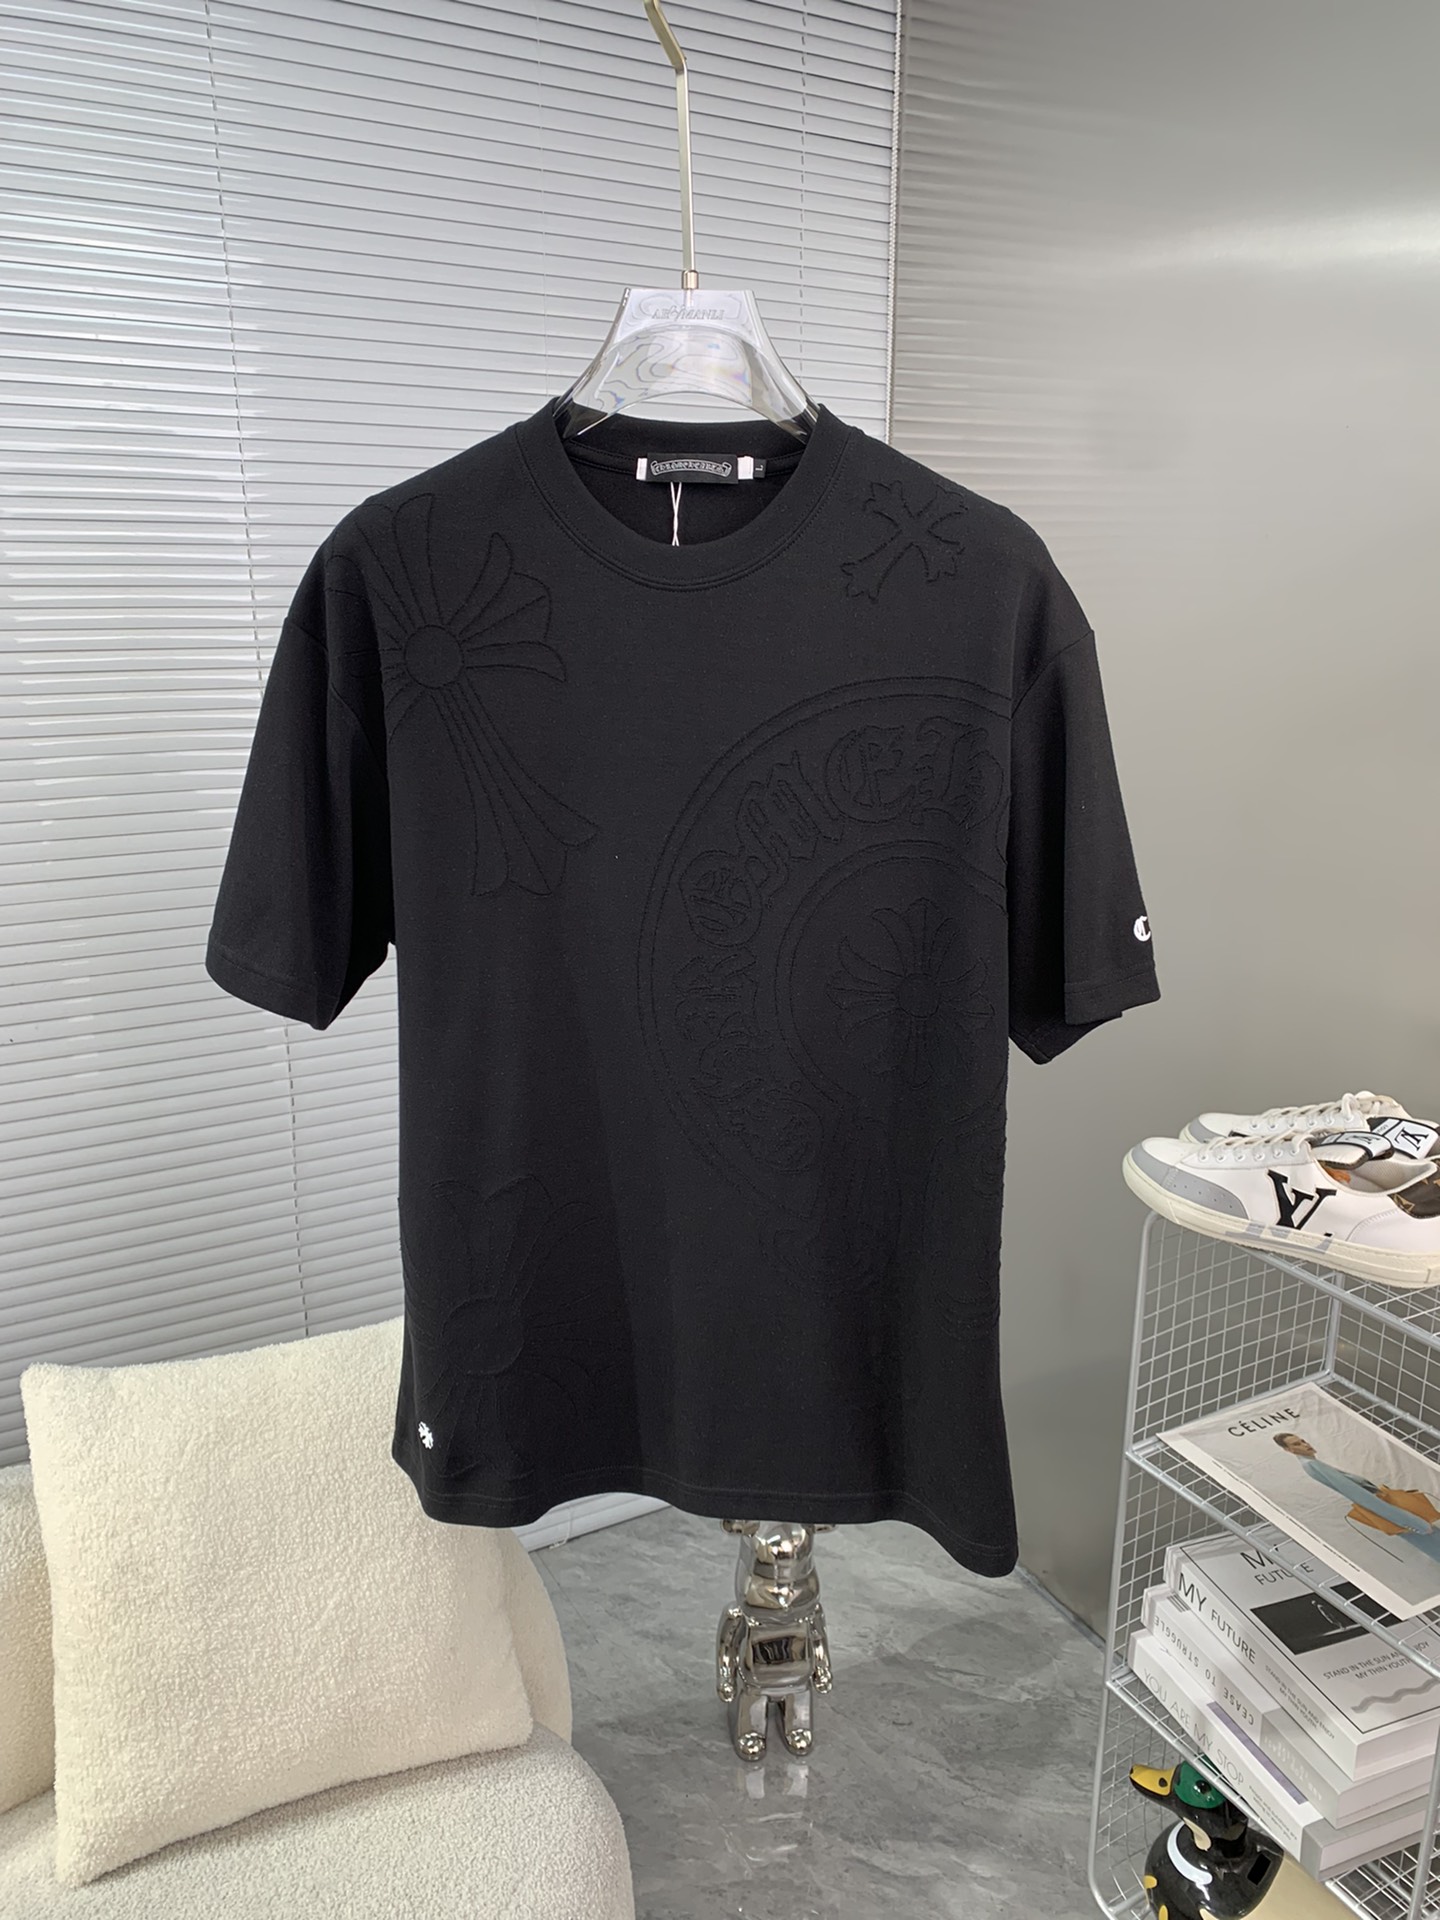 Chrome Hearts Clothing T-Shirt Cotton Mercerized Spring/Summer Collection Short Sleeve